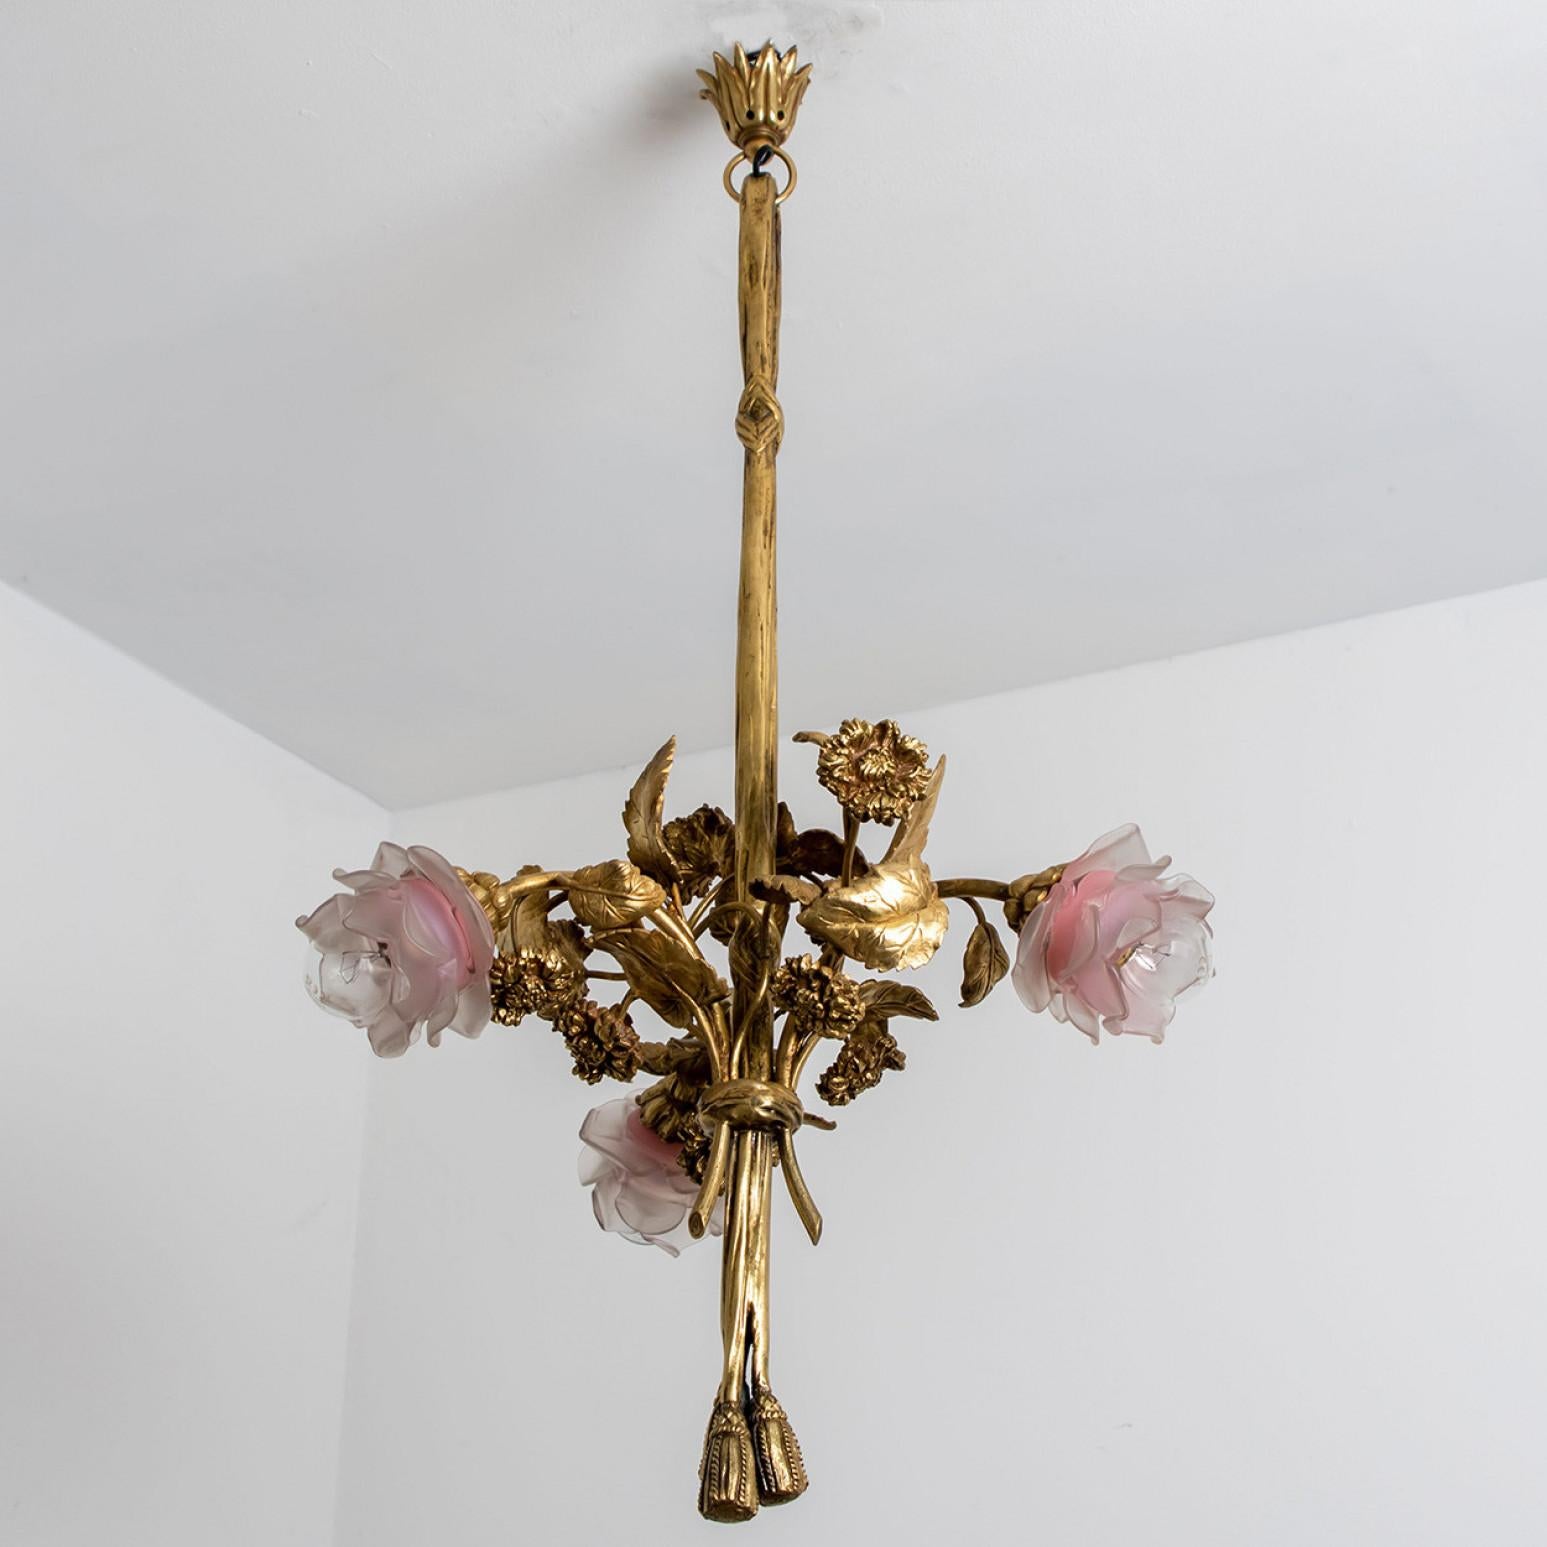 Exeptional Gilt Bronze and Glass Chandelier, France, circa 1890 For Sale 1